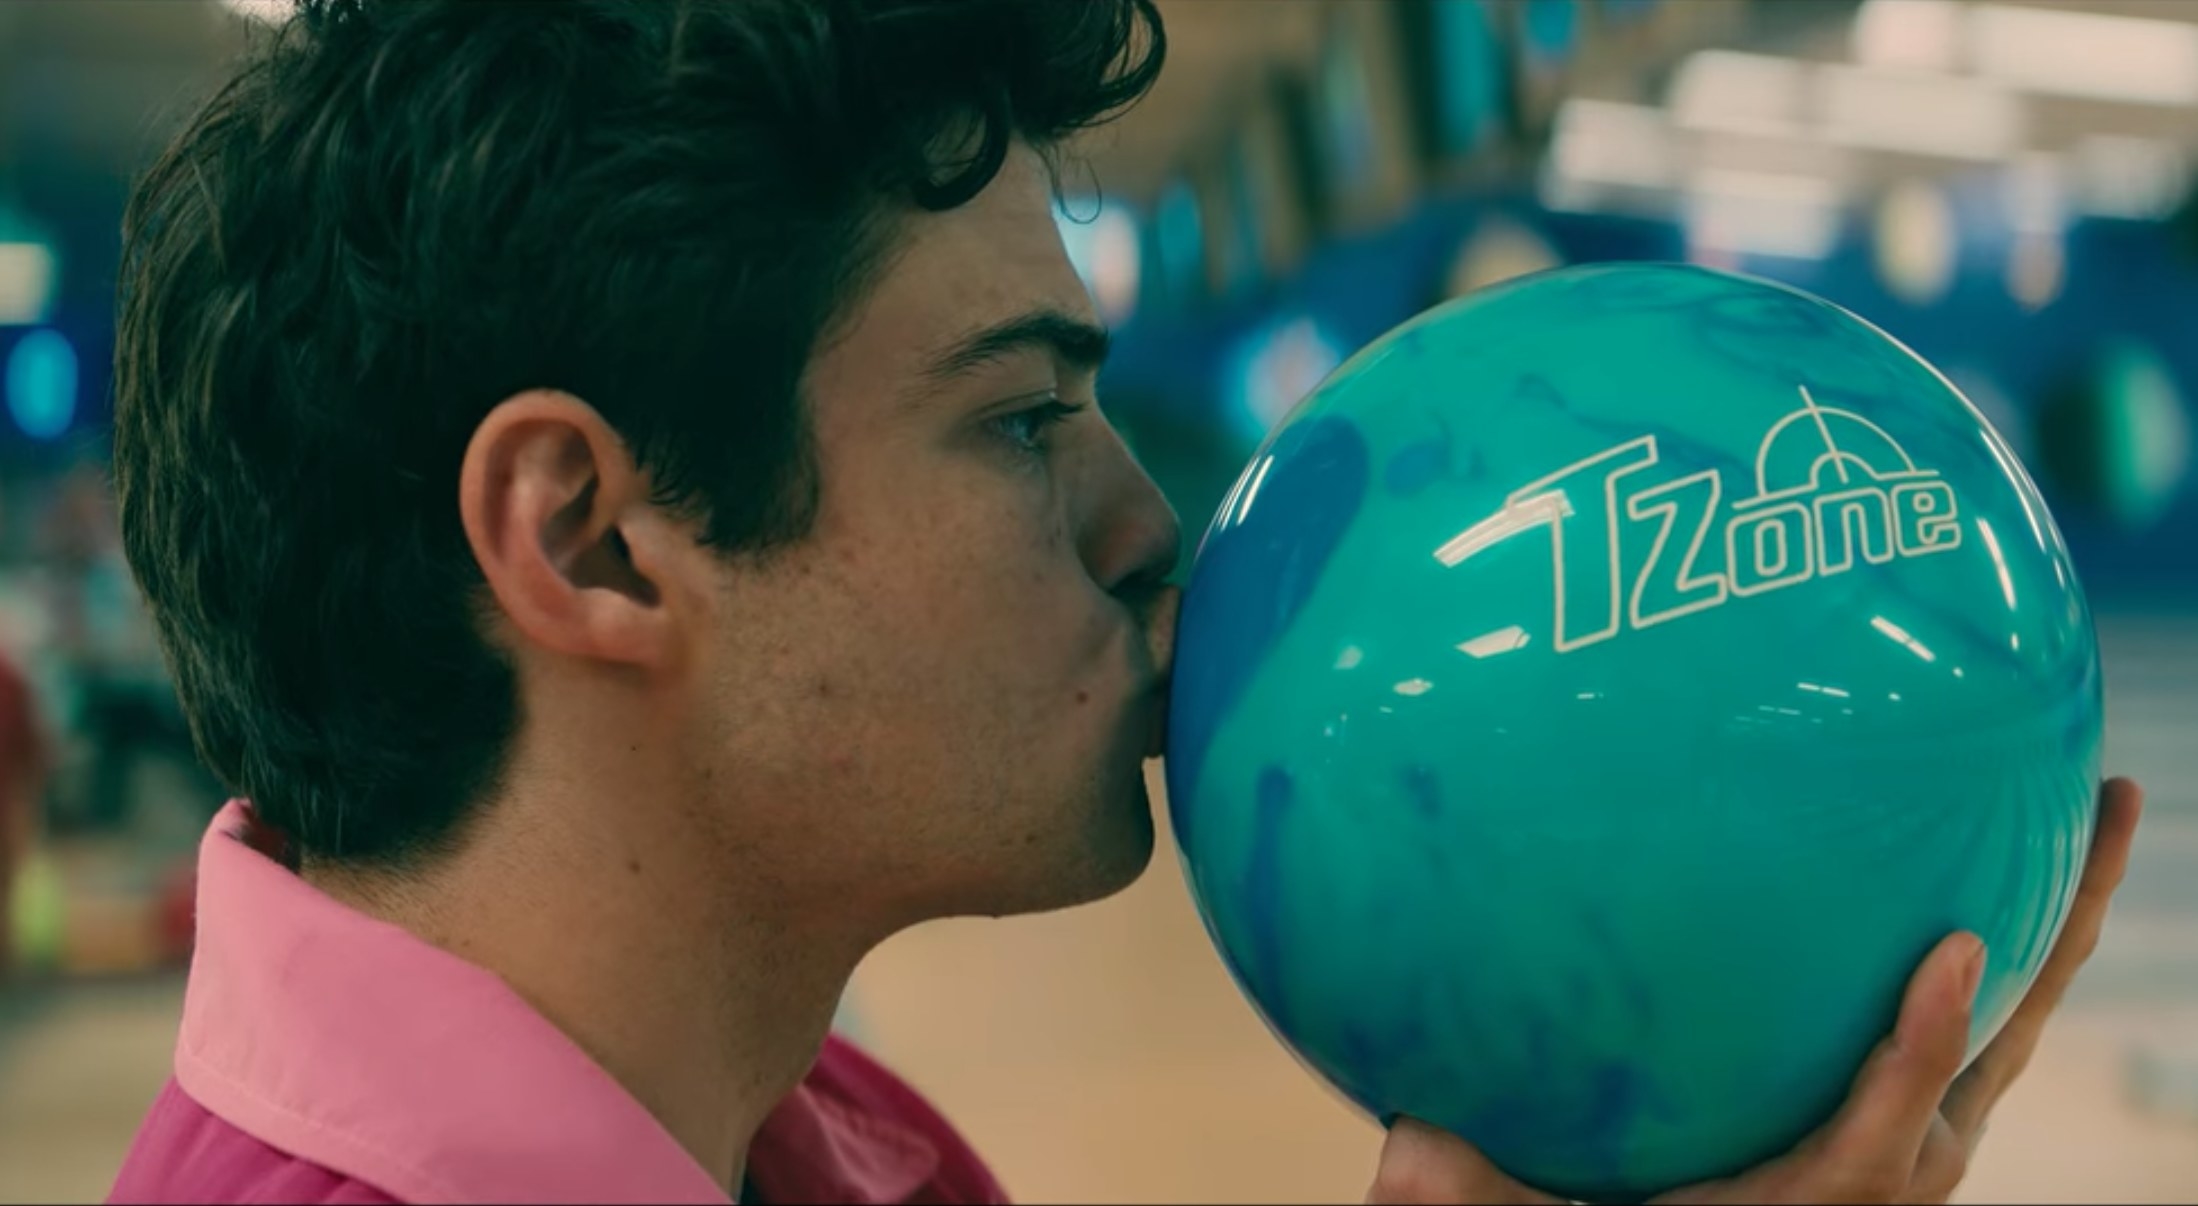 Peter kisses a bowling ball